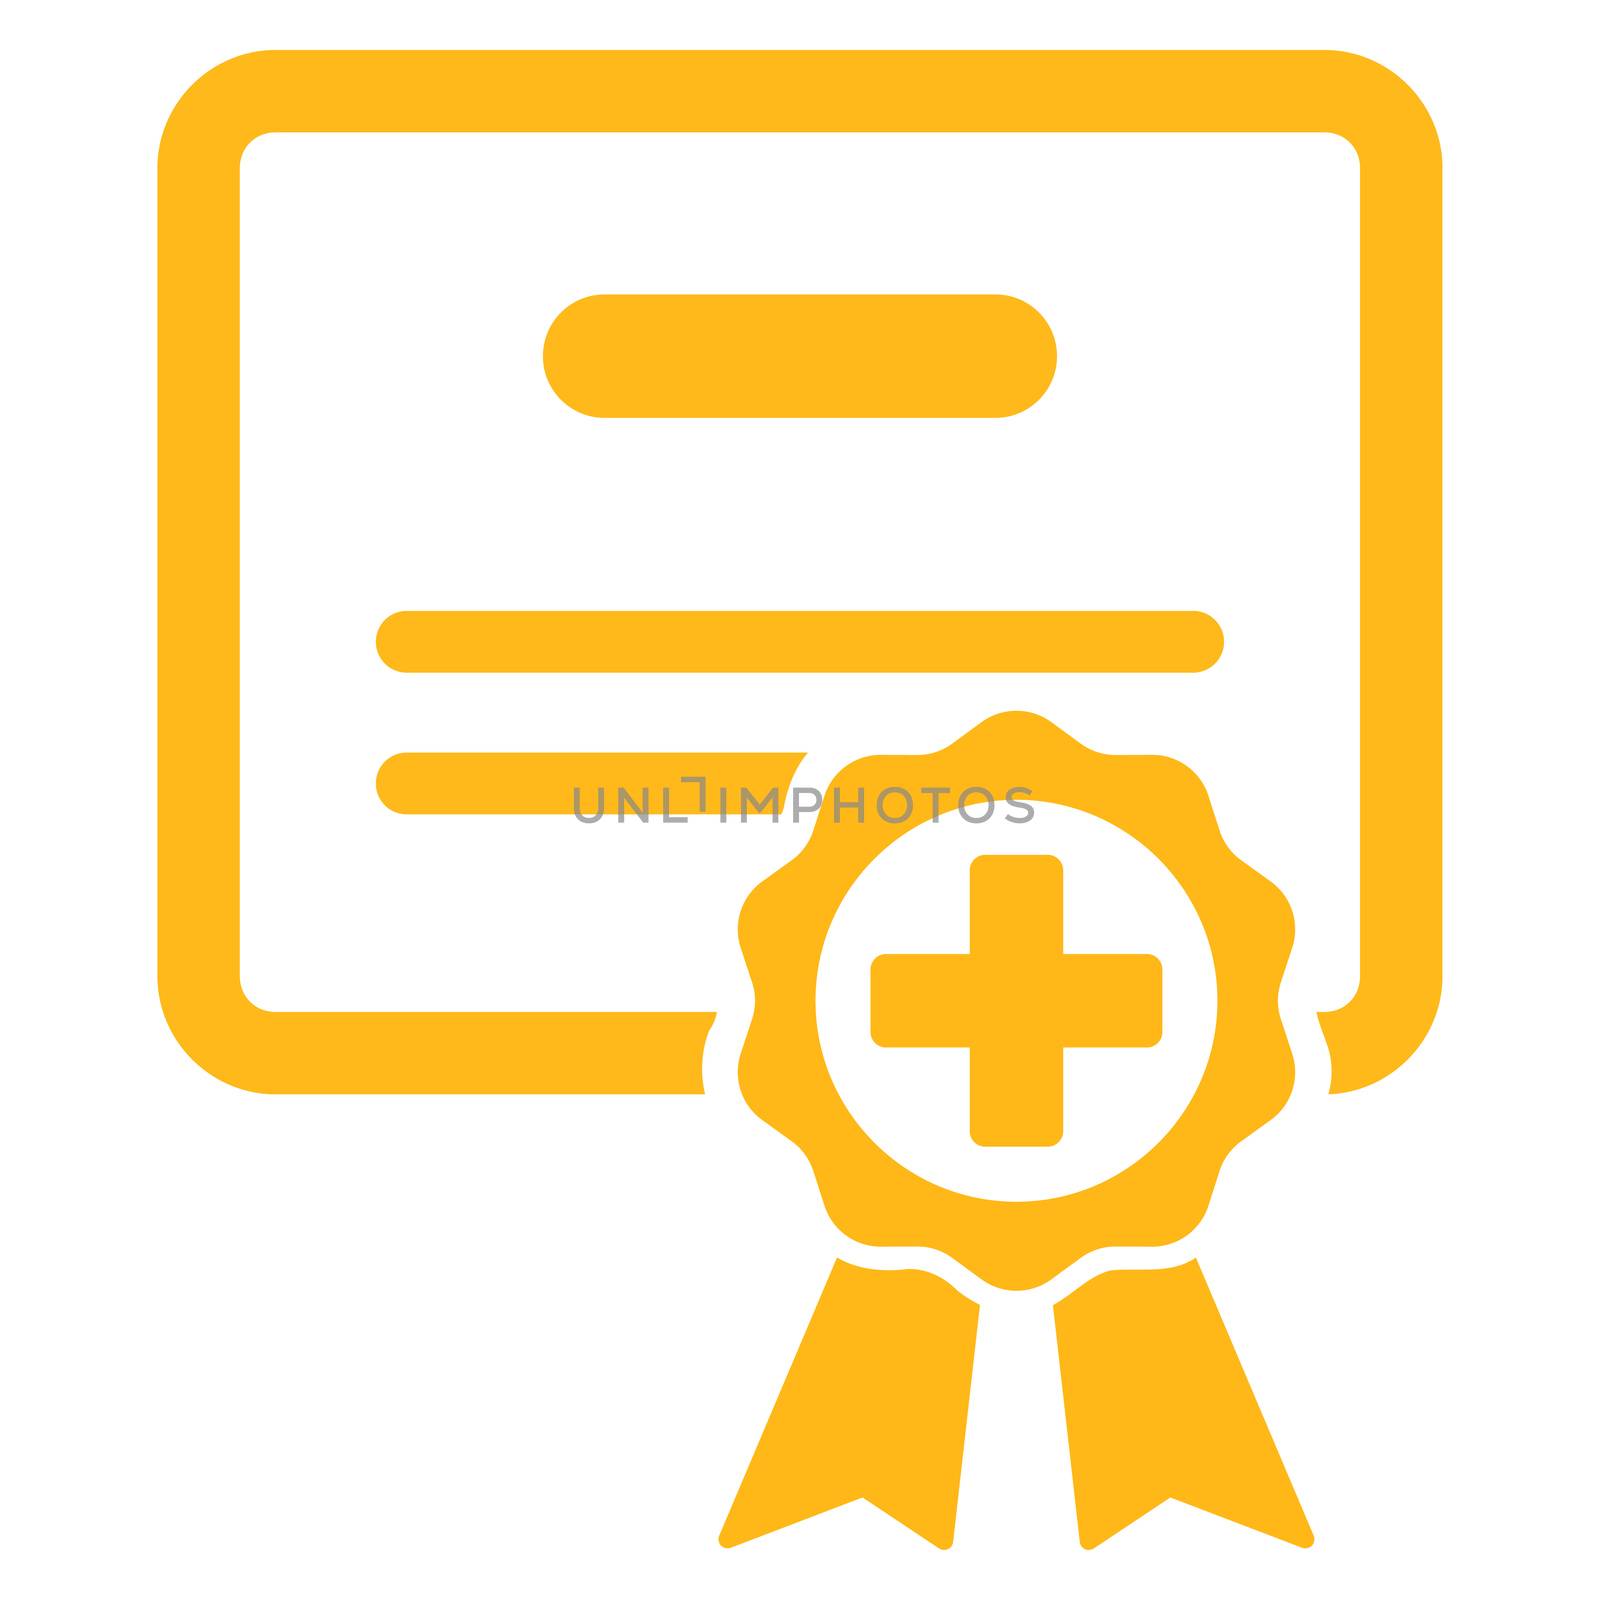 Certification raster icon. Style is flat symbol, yellow color, rounded angles, white background.